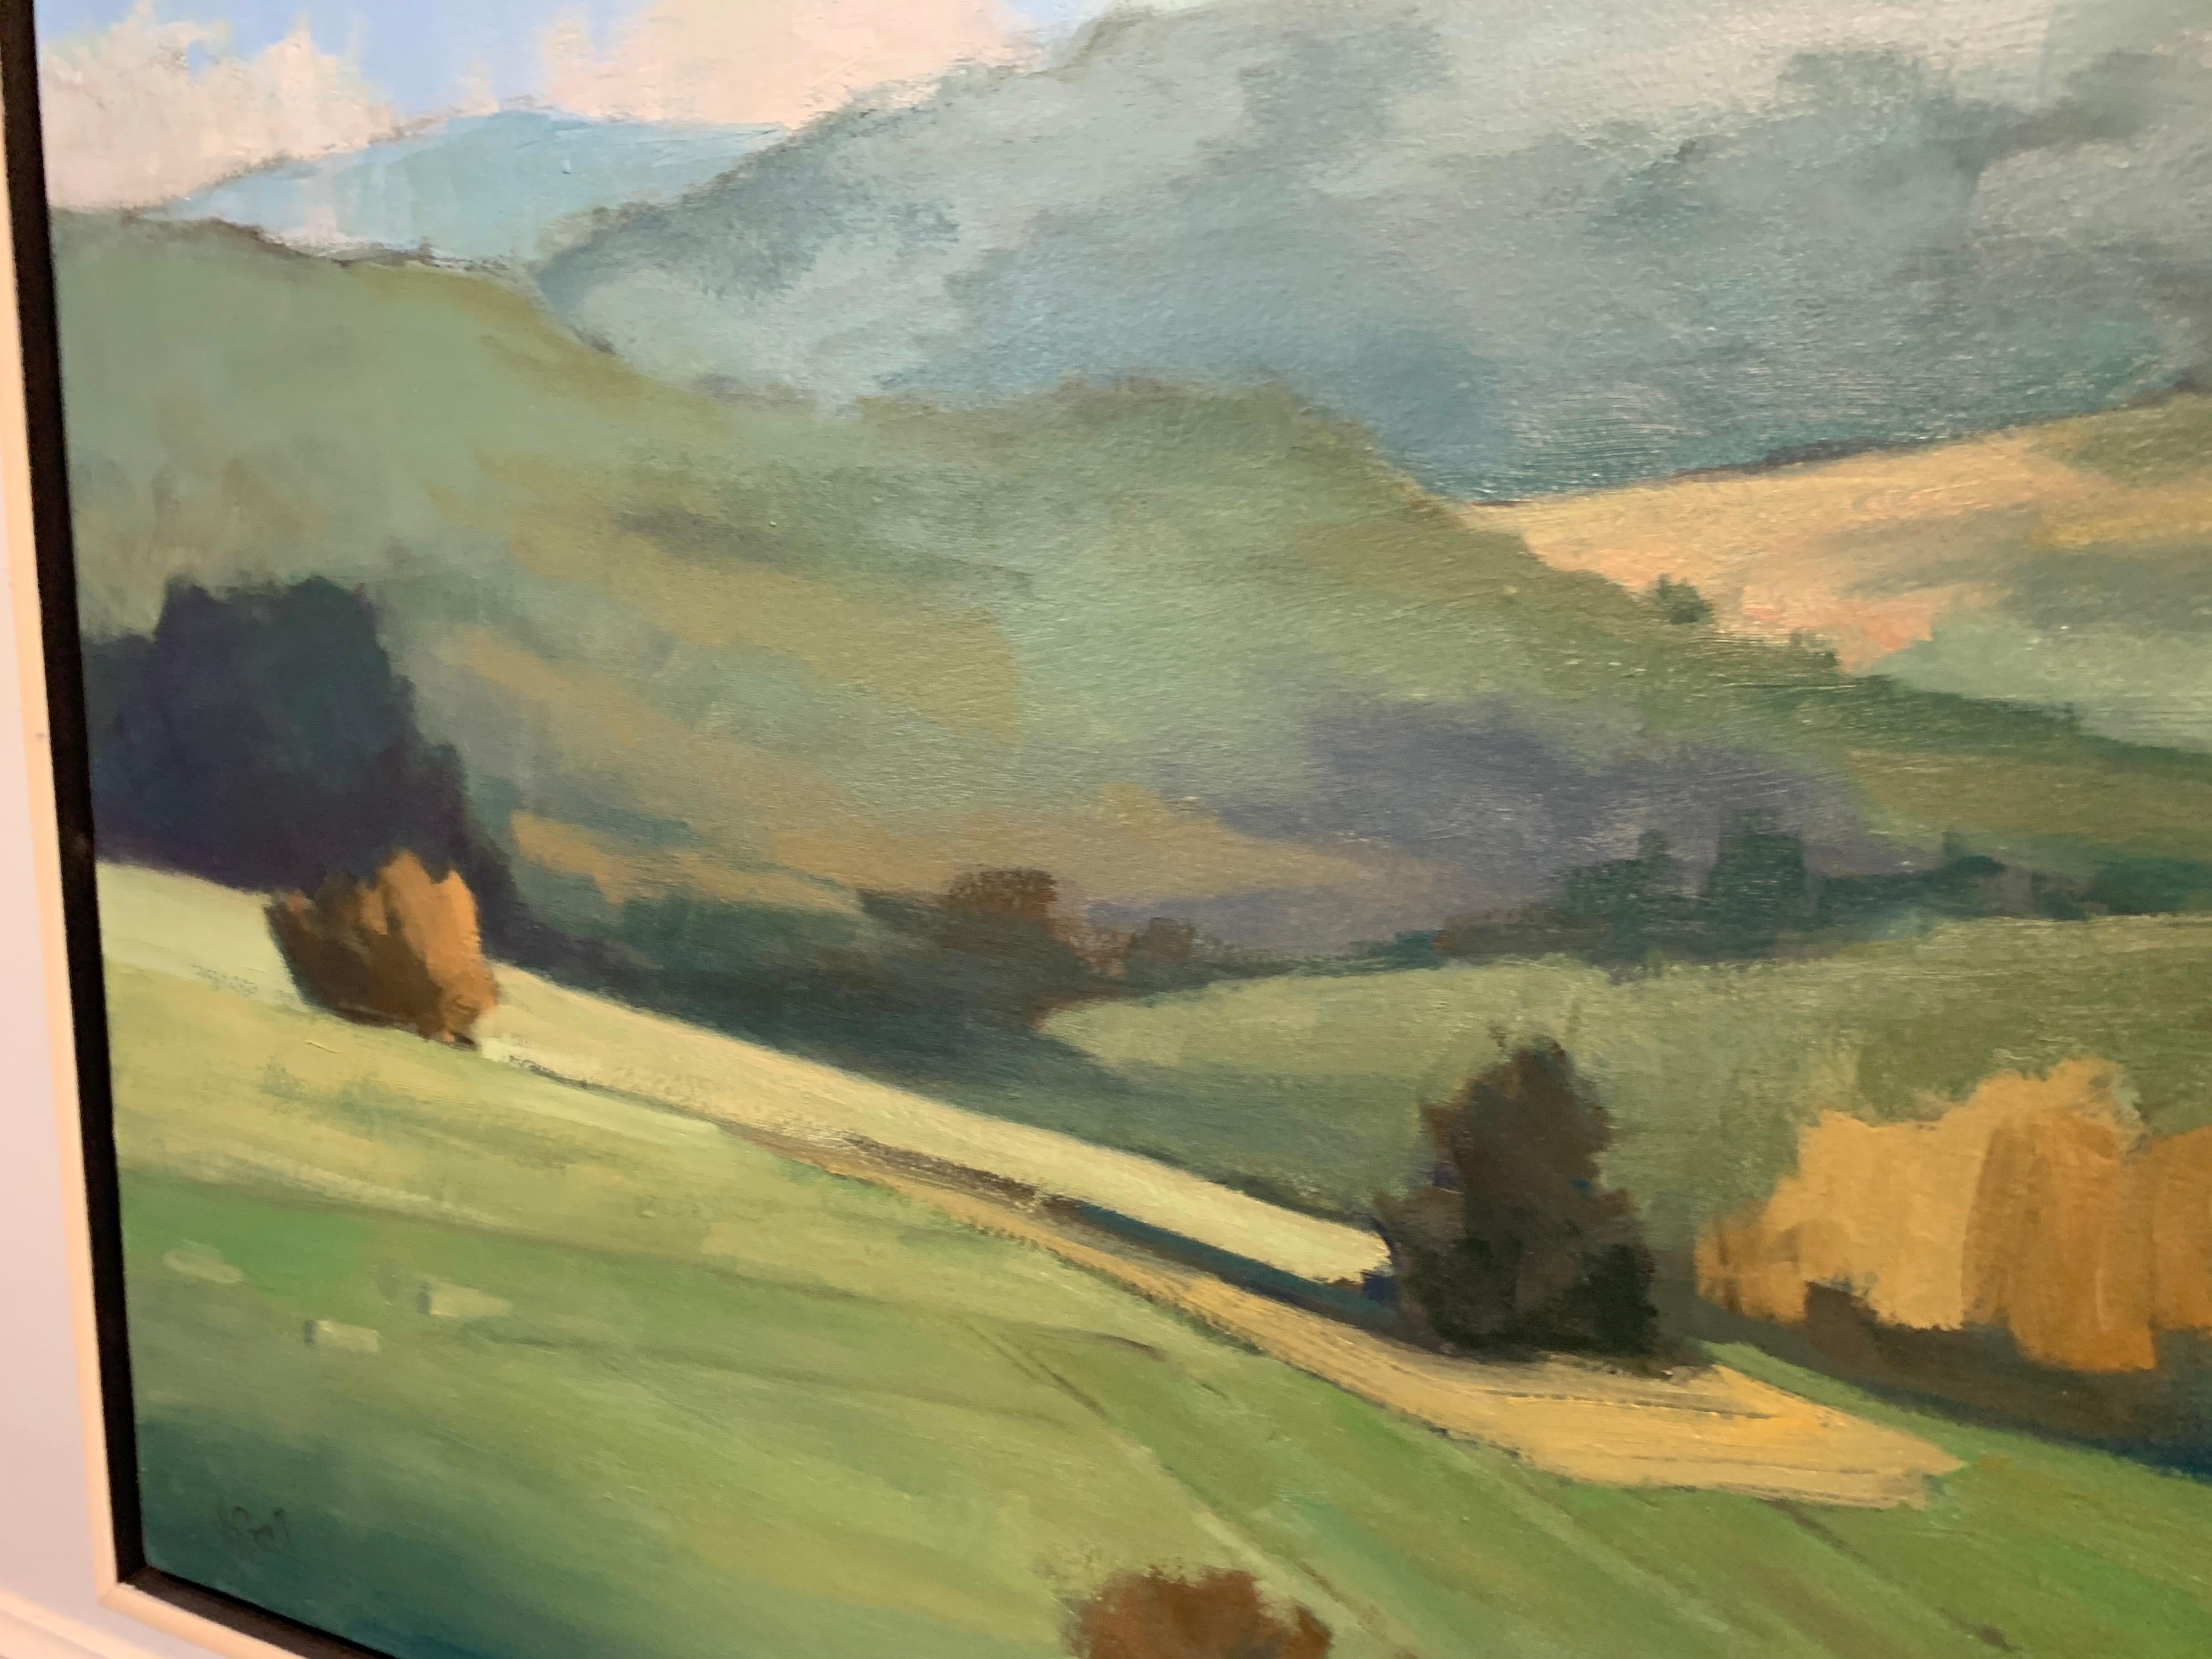 Hilly Vista by Lesley Powell, Square Oil on Canvas Landscape 3